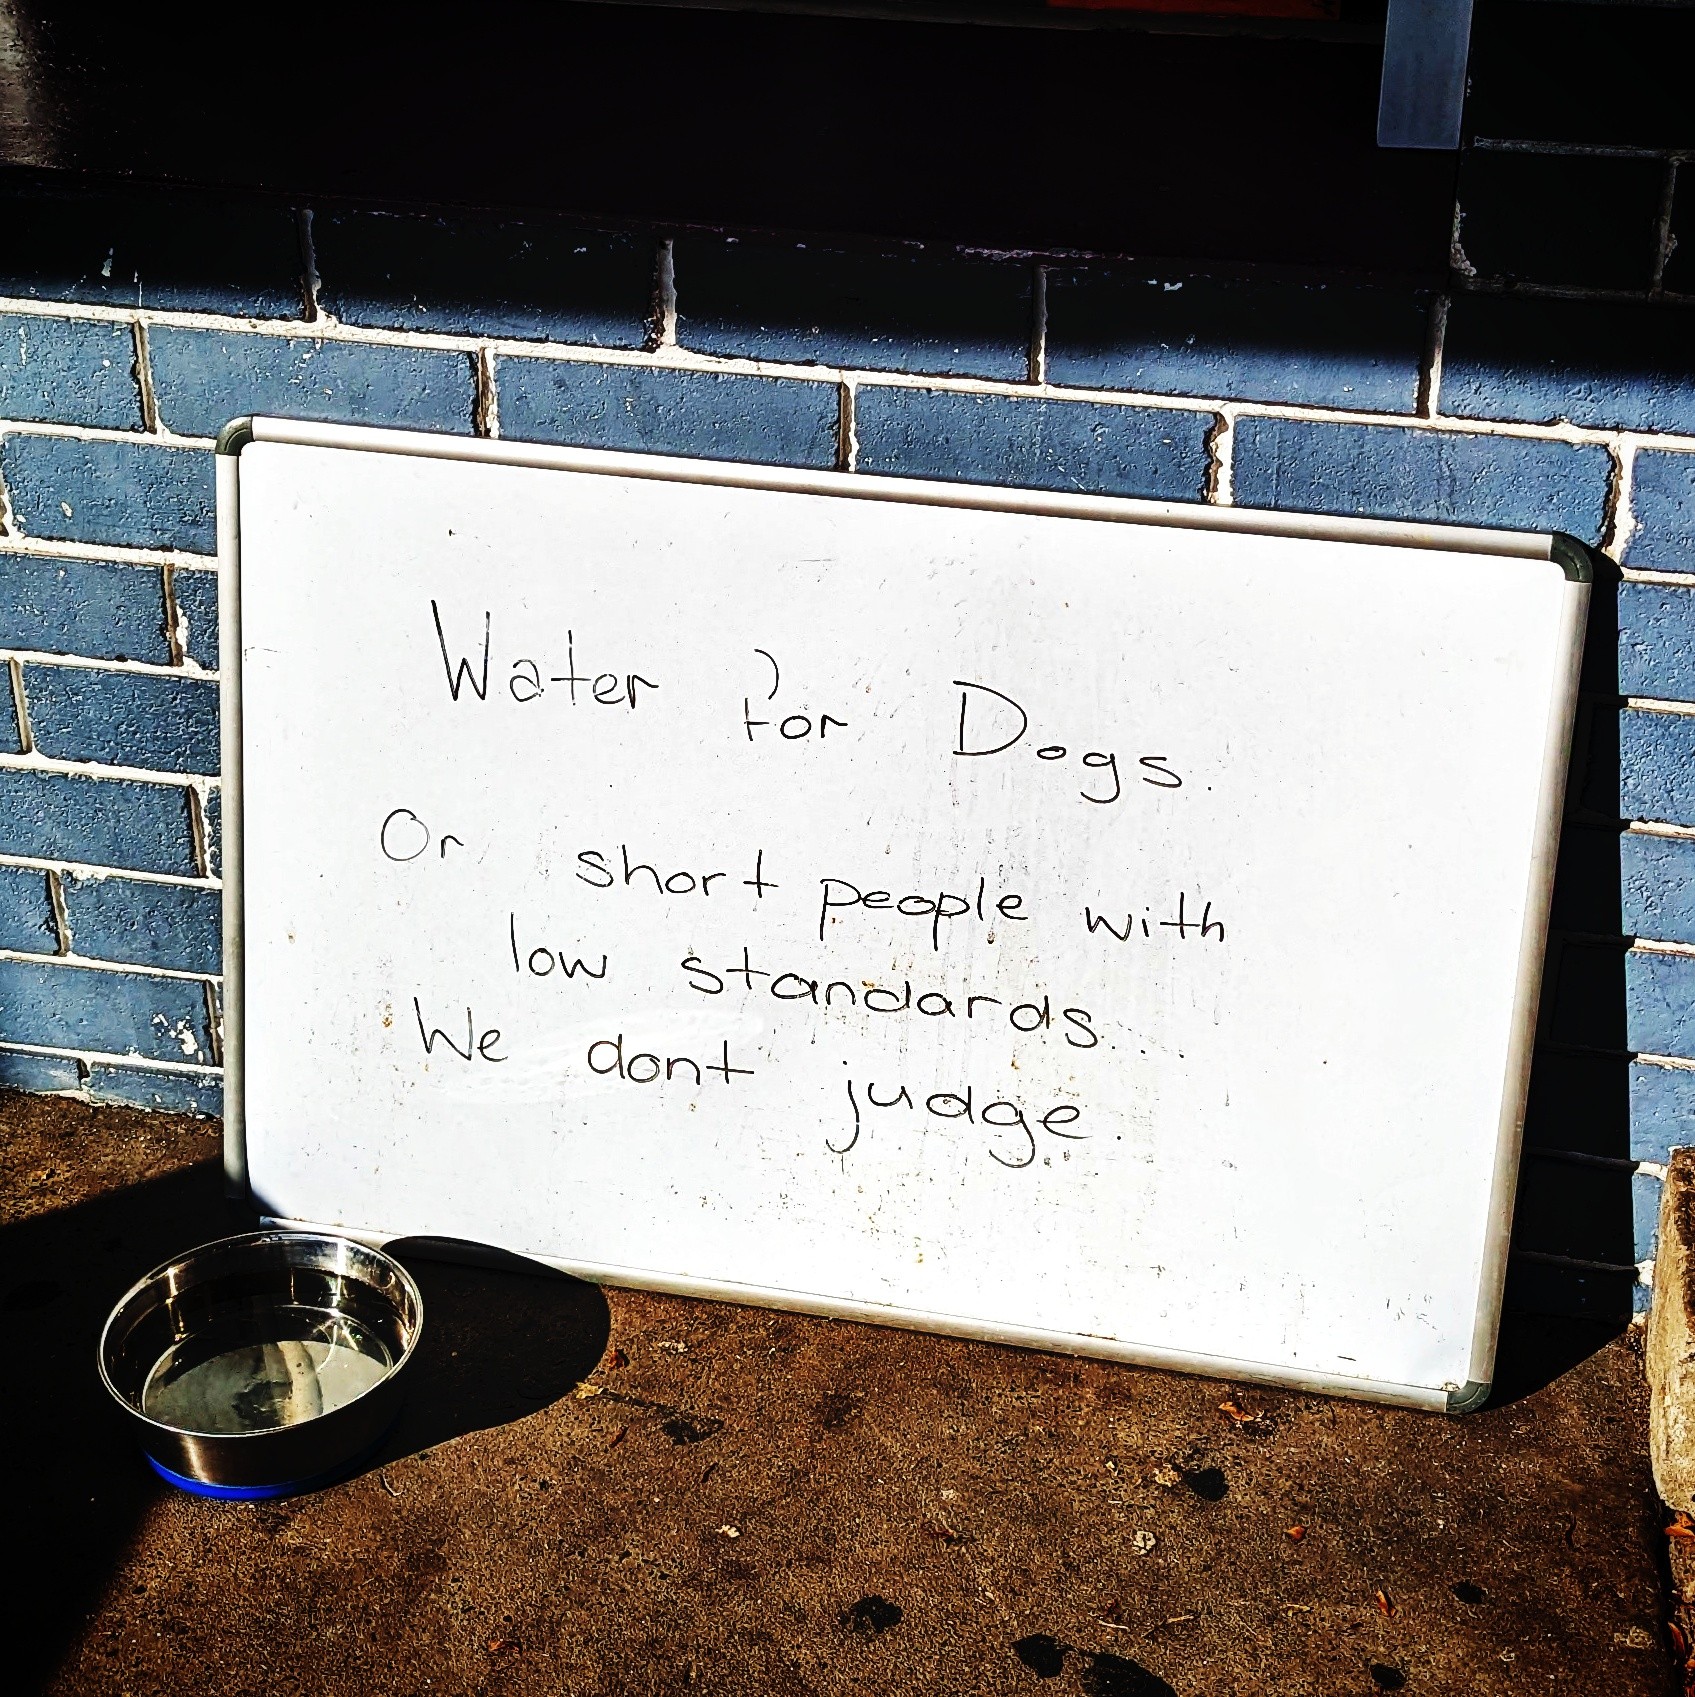 Sign leaning on an Aussie corner shop next to a dog's water bowl, "Water For Dogs, or short people with low standards, we don't judge"